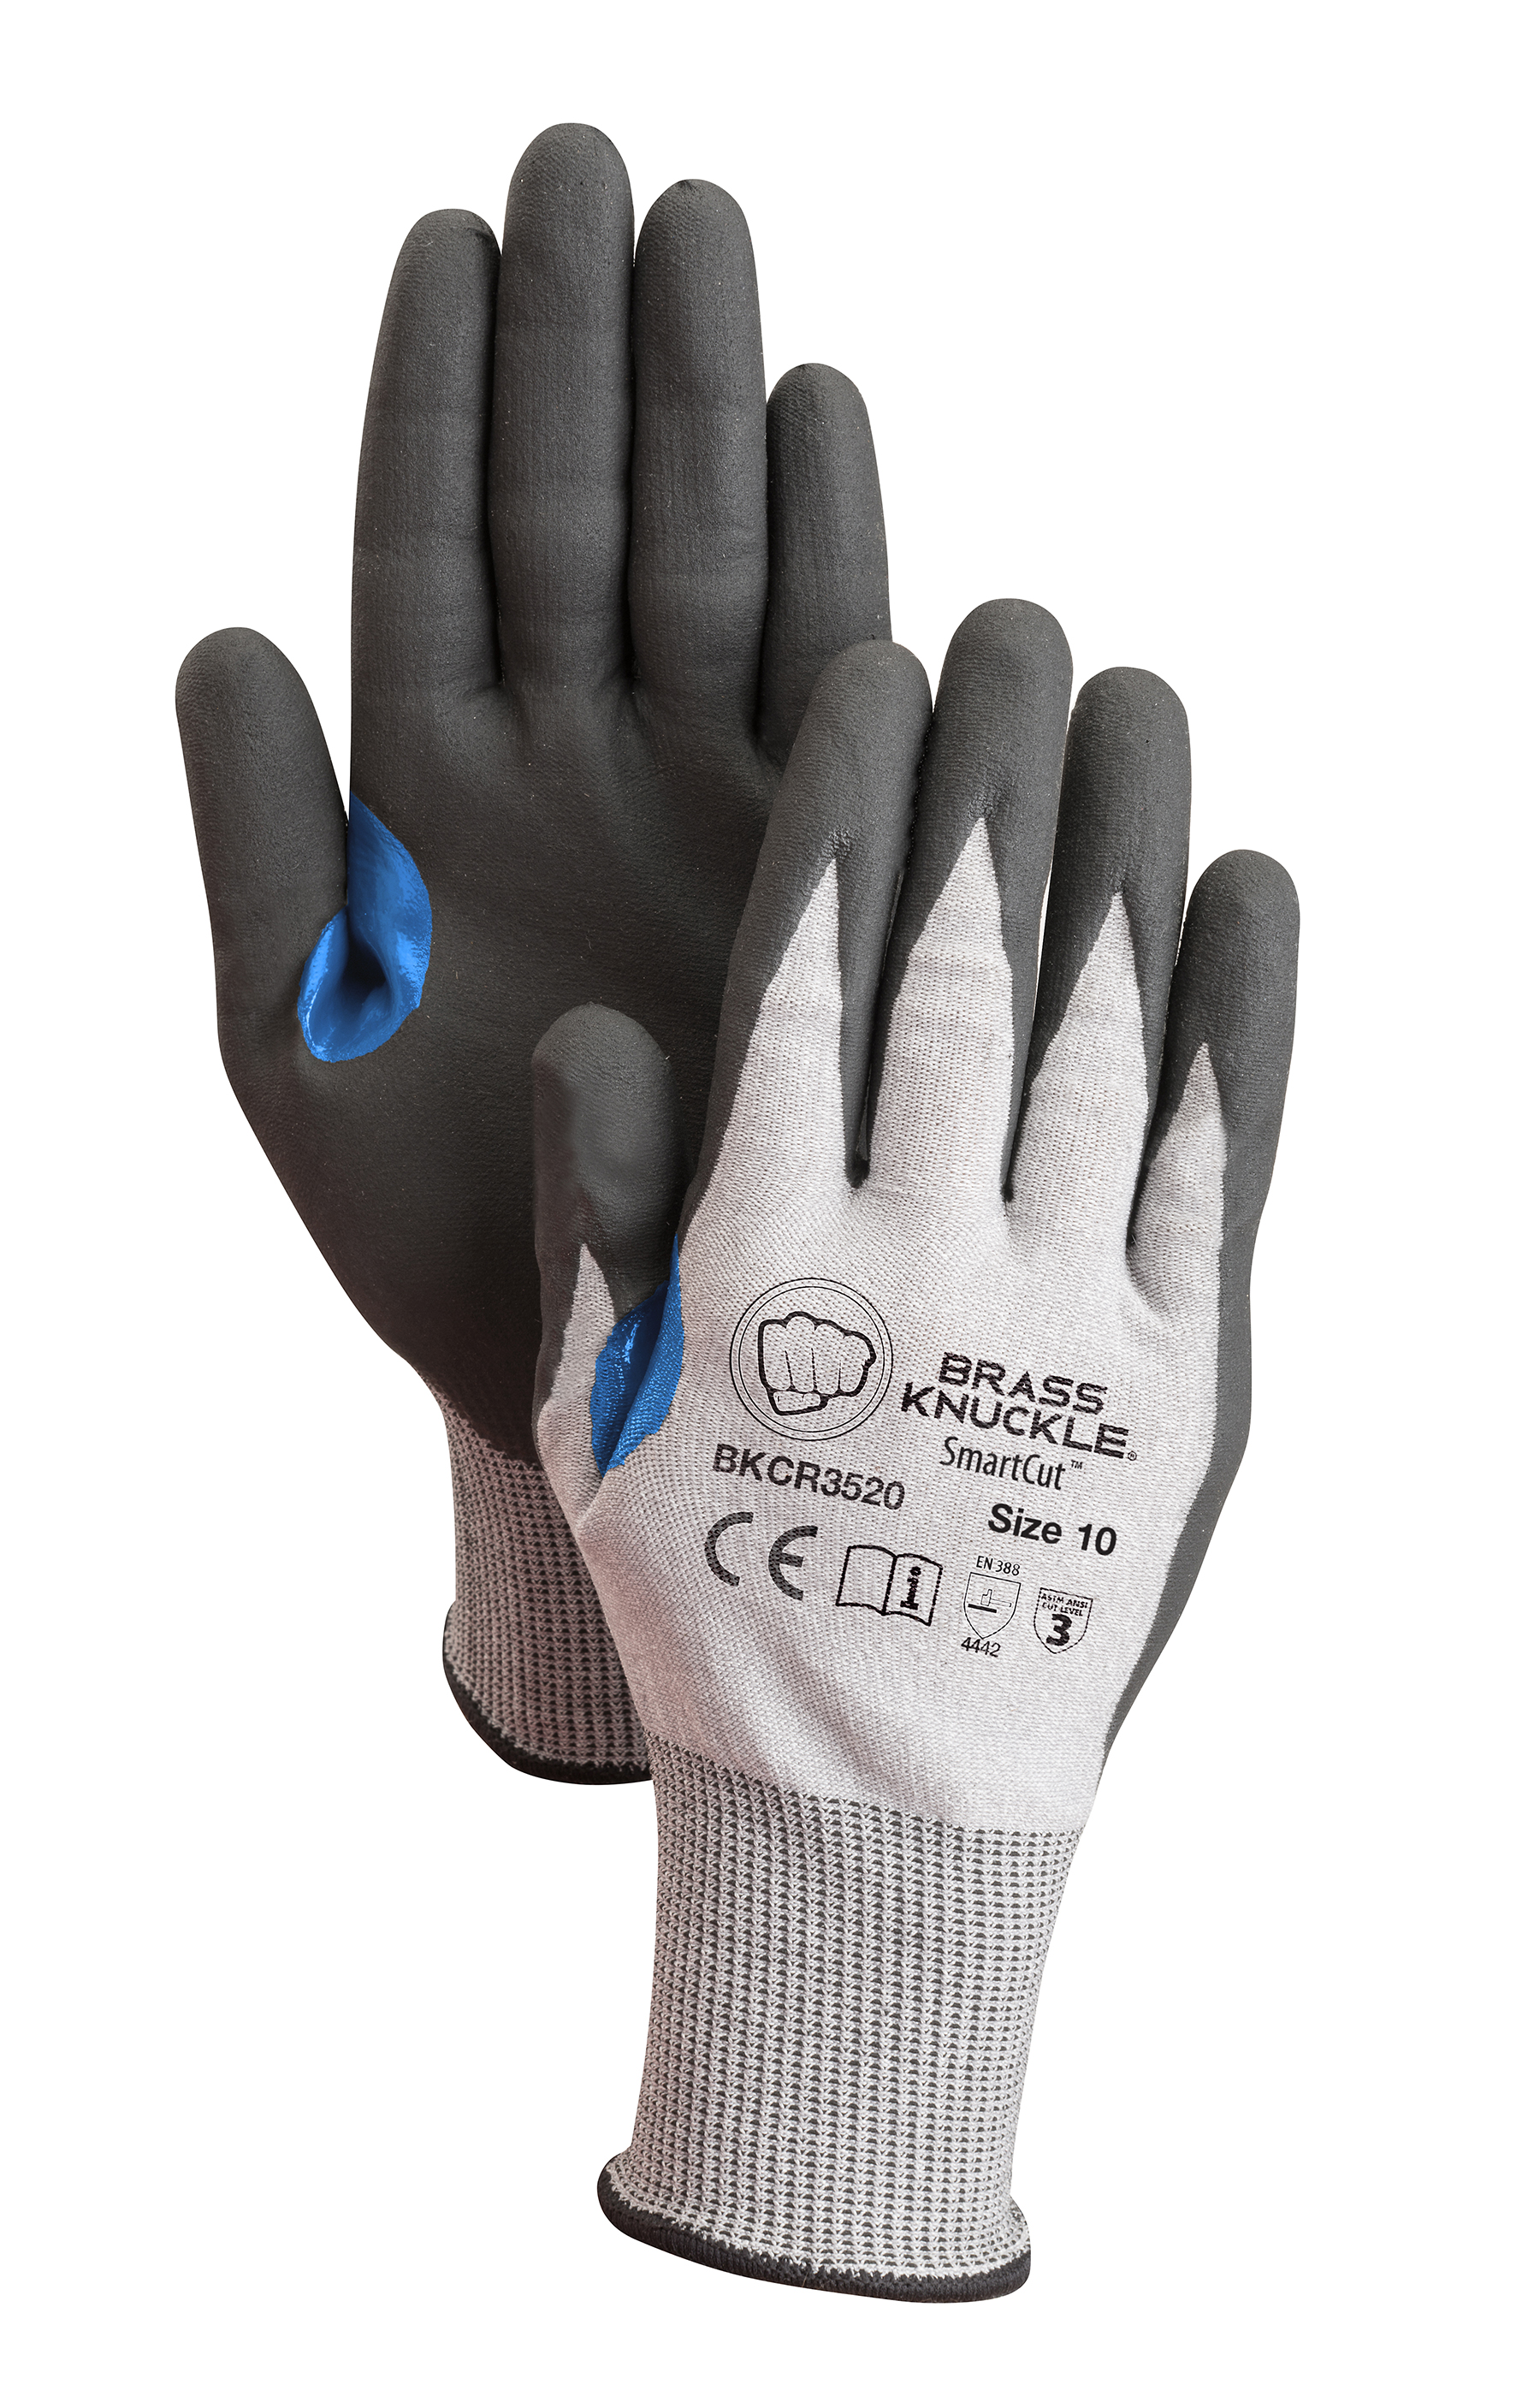 HPPE CR Level A2 Shell Form Nitrile Coating Reinforces Thumb Crotch Glove - Cut Resistant